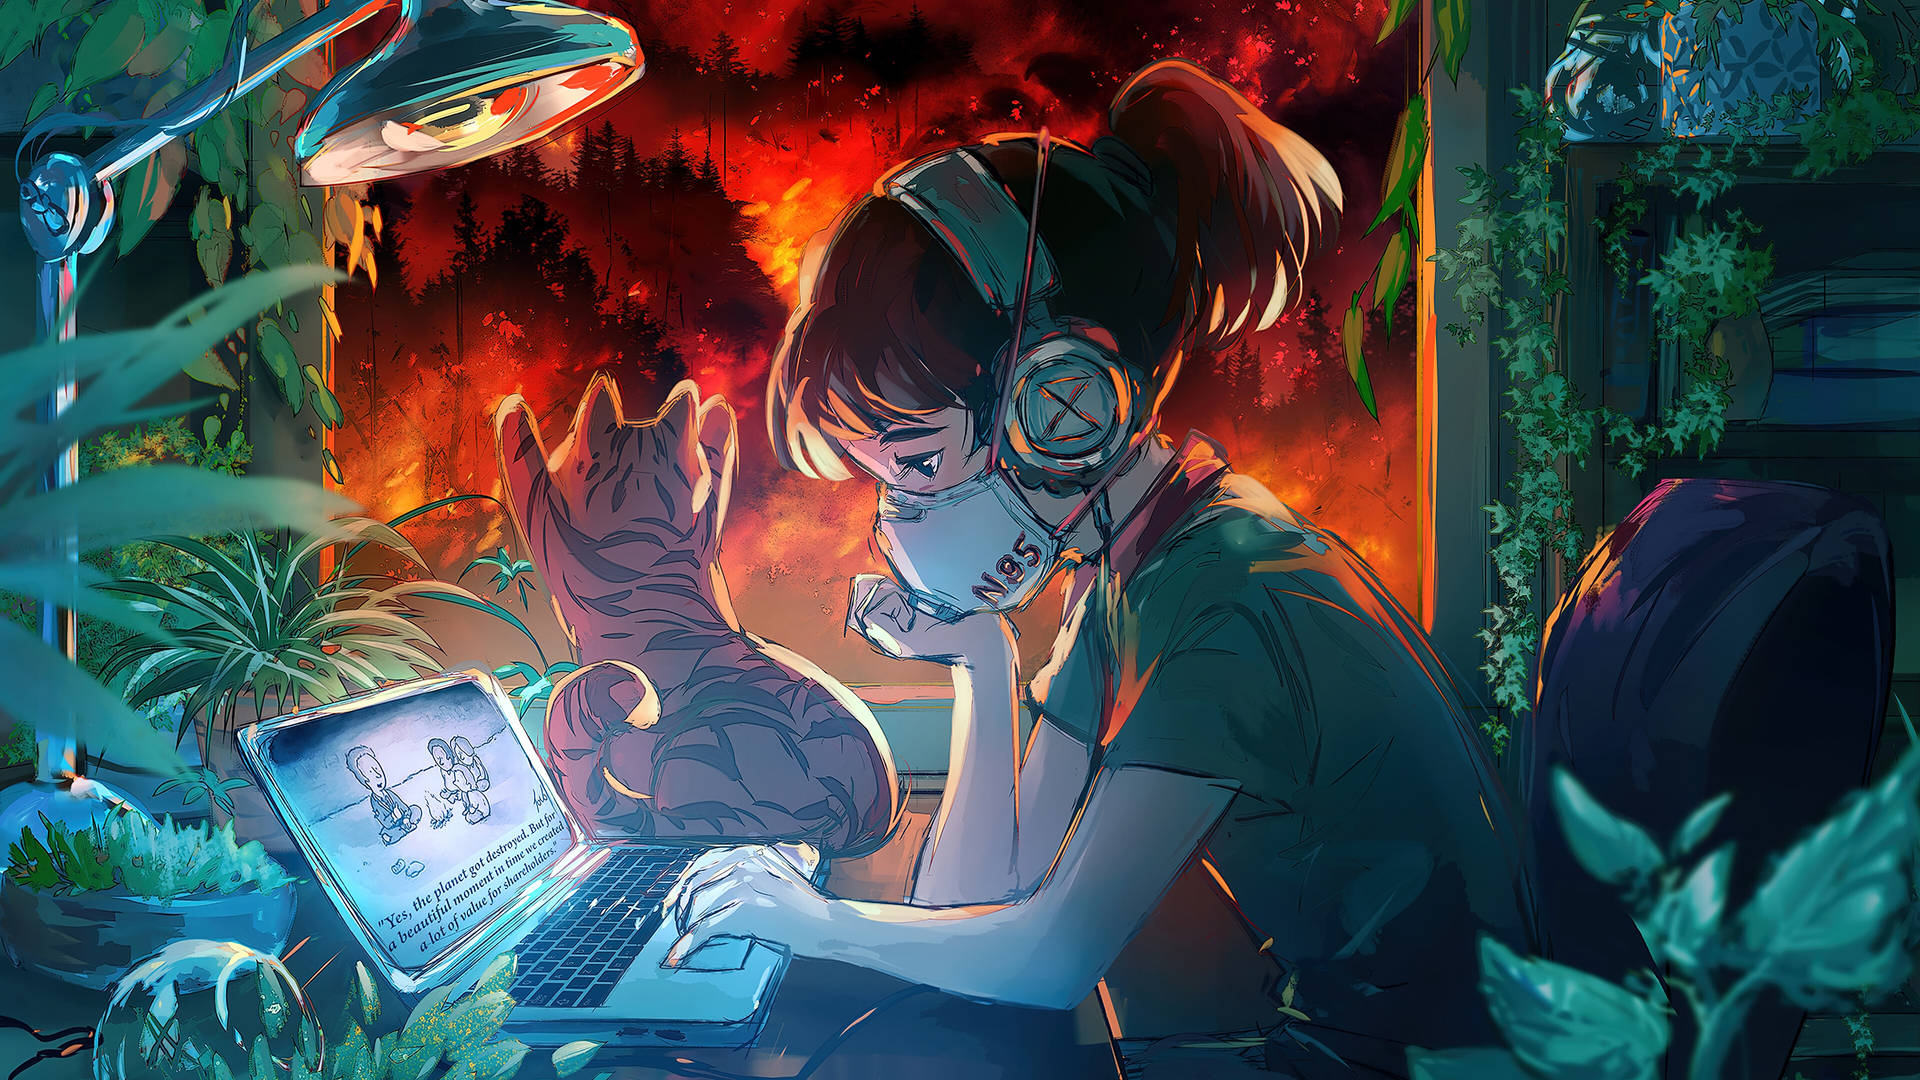 Masked Anime Girl Works On Laptop With Her Cat Wallpaper